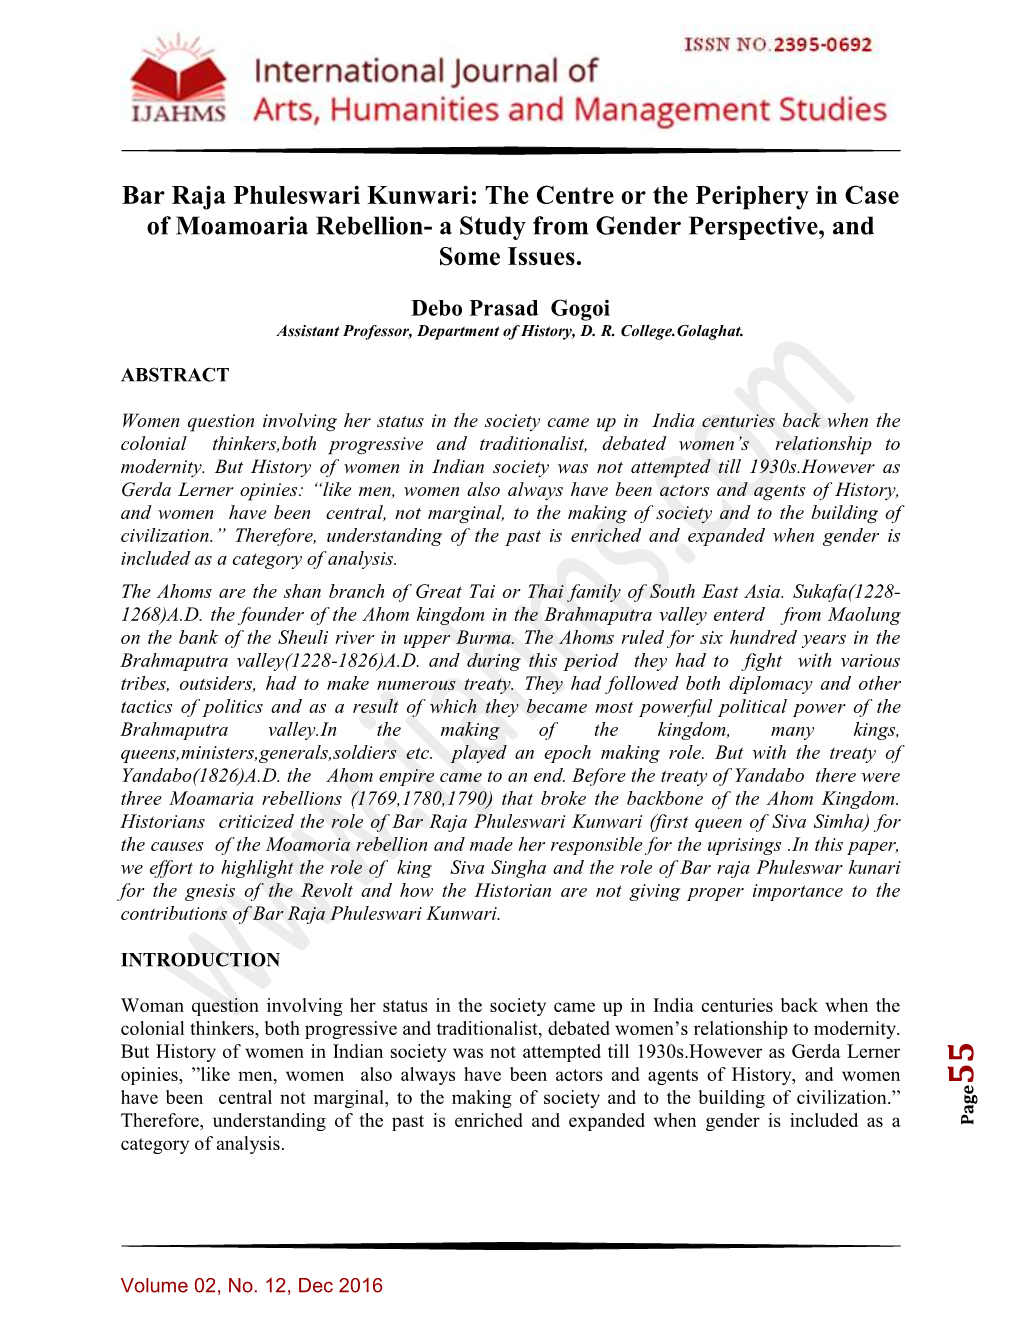 Bar Raja Phuleswari Kunwari: the Centre Or the Periphery in Case of Moamoaria Rebellion- a Study from Gender Perspective, and Some Issues